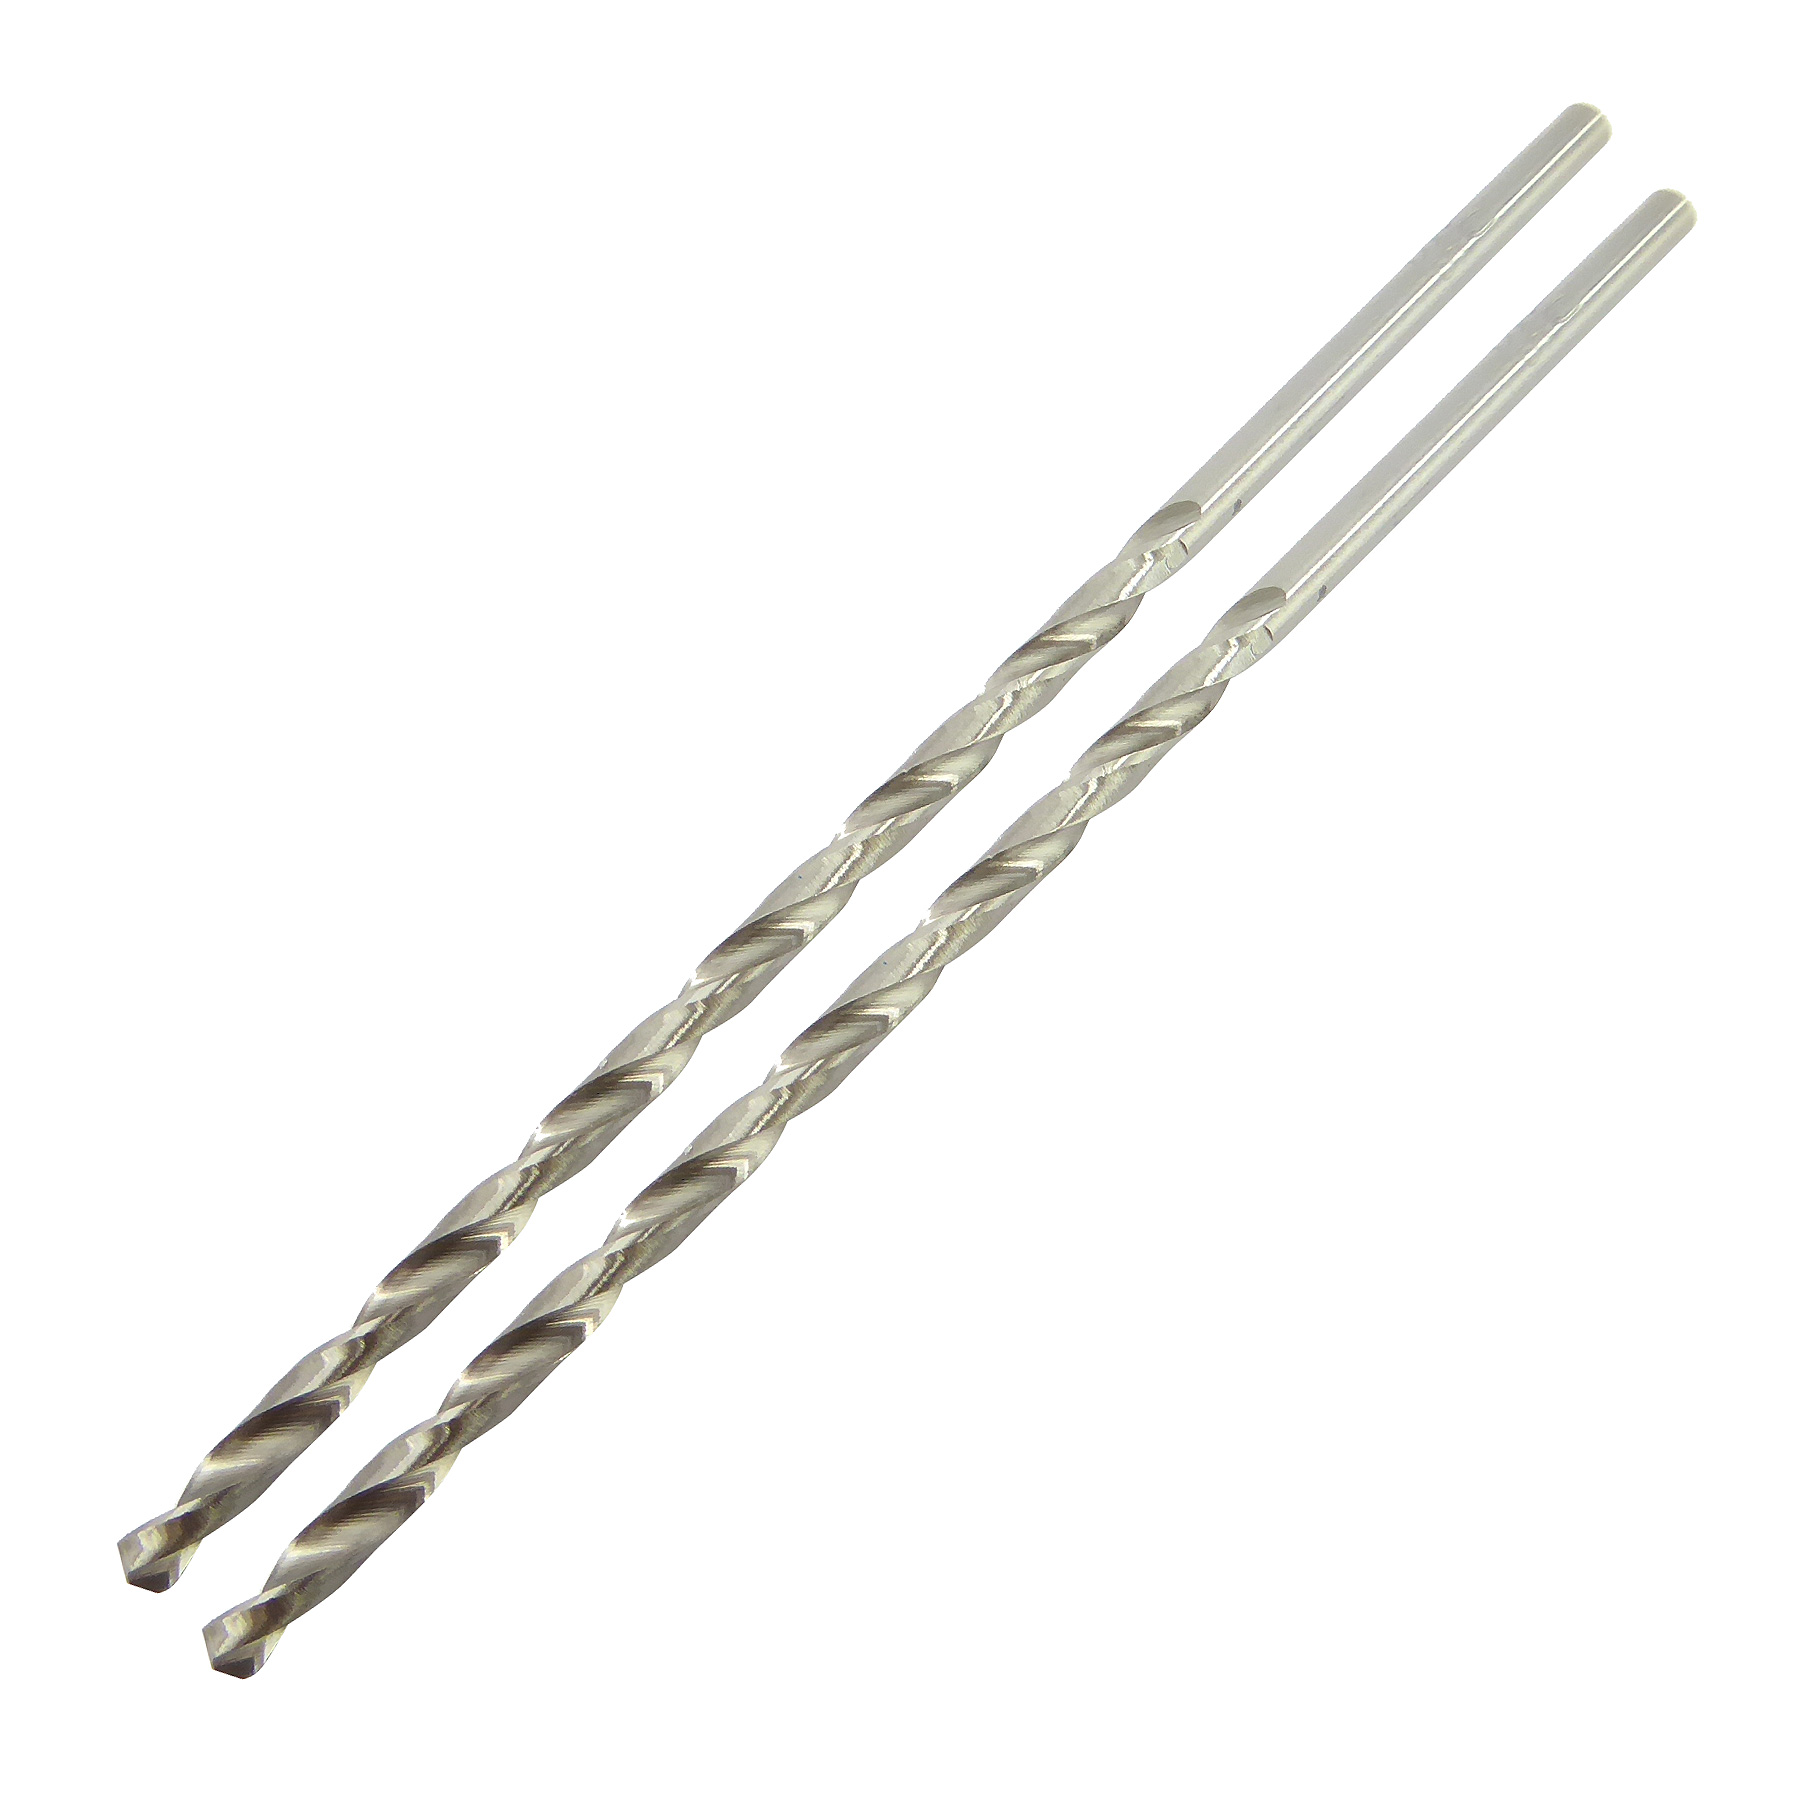 3.0mm x 100mm Long Series Ground Twist Drill Pack of 2